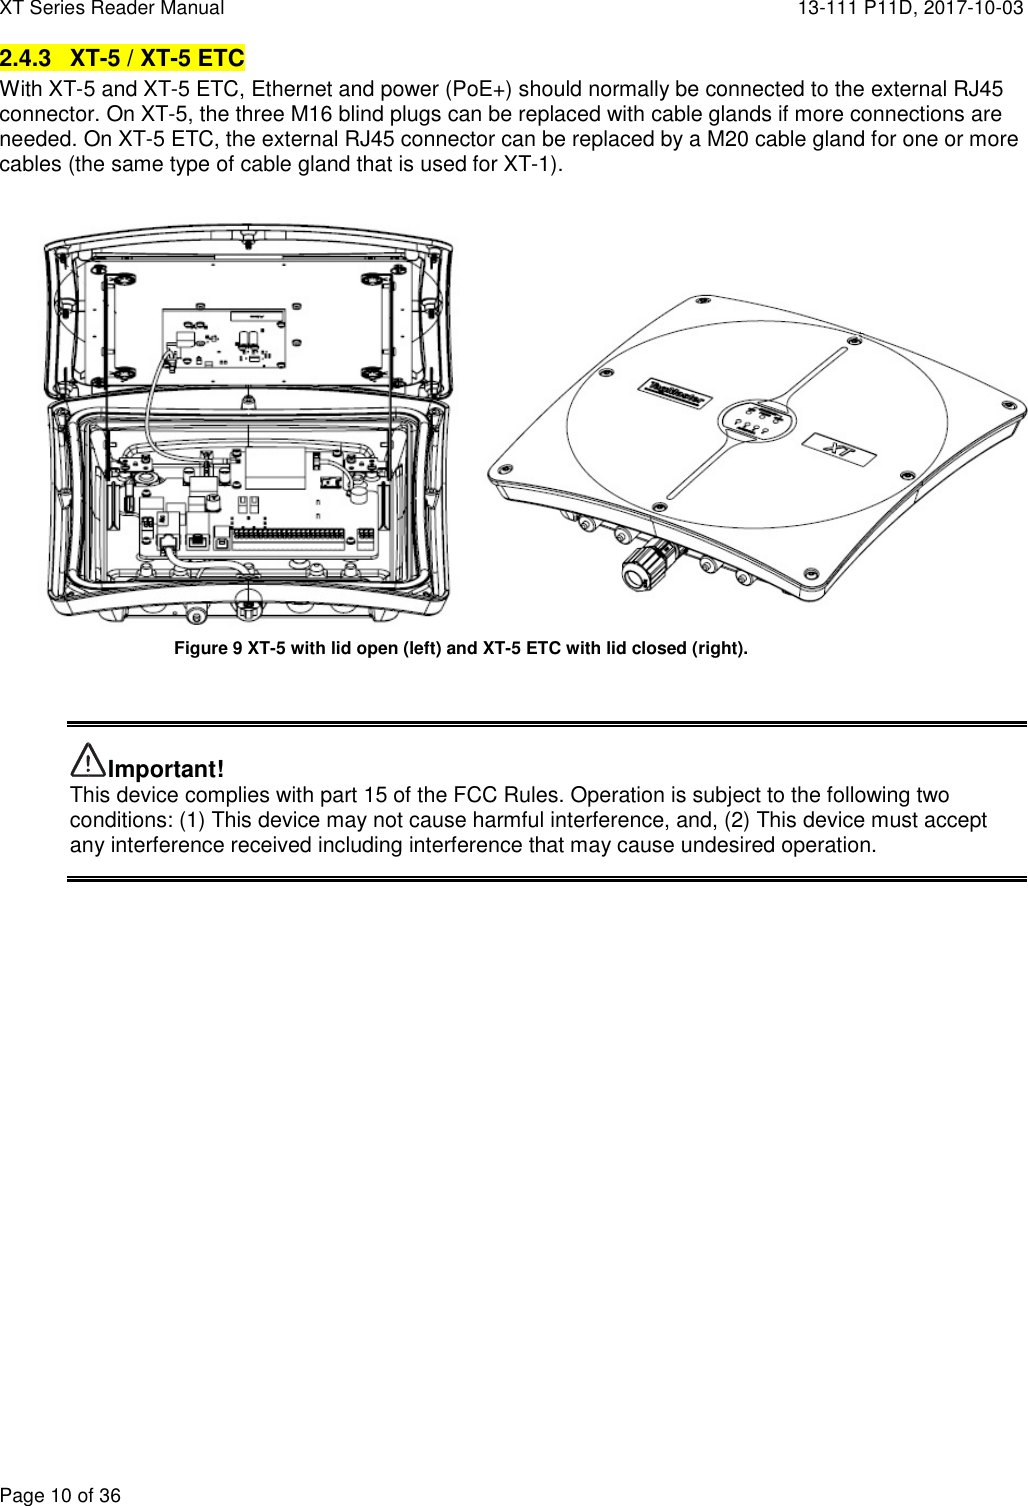 XT Series Reader Manual  13-111 P11D, 2017-10-03  Page 10 of 36 2.4.3  XT-5 / XT-5 ETC With XT-5 and XT-5 ETC, Ethernet and power (PoE+) should normally be connected to the external RJ45 connector. On XT-5, the three M16 blind plugs can be replaced with cable glands if more connections are needed. On XT-5 ETC, the external RJ45 connector can be replaced by a M20 cable gland for one or more cables (the same type of cable gland that is used for XT-1).         Important! This device complies with part 15 of the FCC Rules. Operation is subject to the following two conditions: (1) This device may not cause harmful interference, and, (2) This device must accept any interference received including interference that may cause undesired operation.    Figure 9 XT-5 with lid open (left) and XT-5 ETC with lid closed (right). 